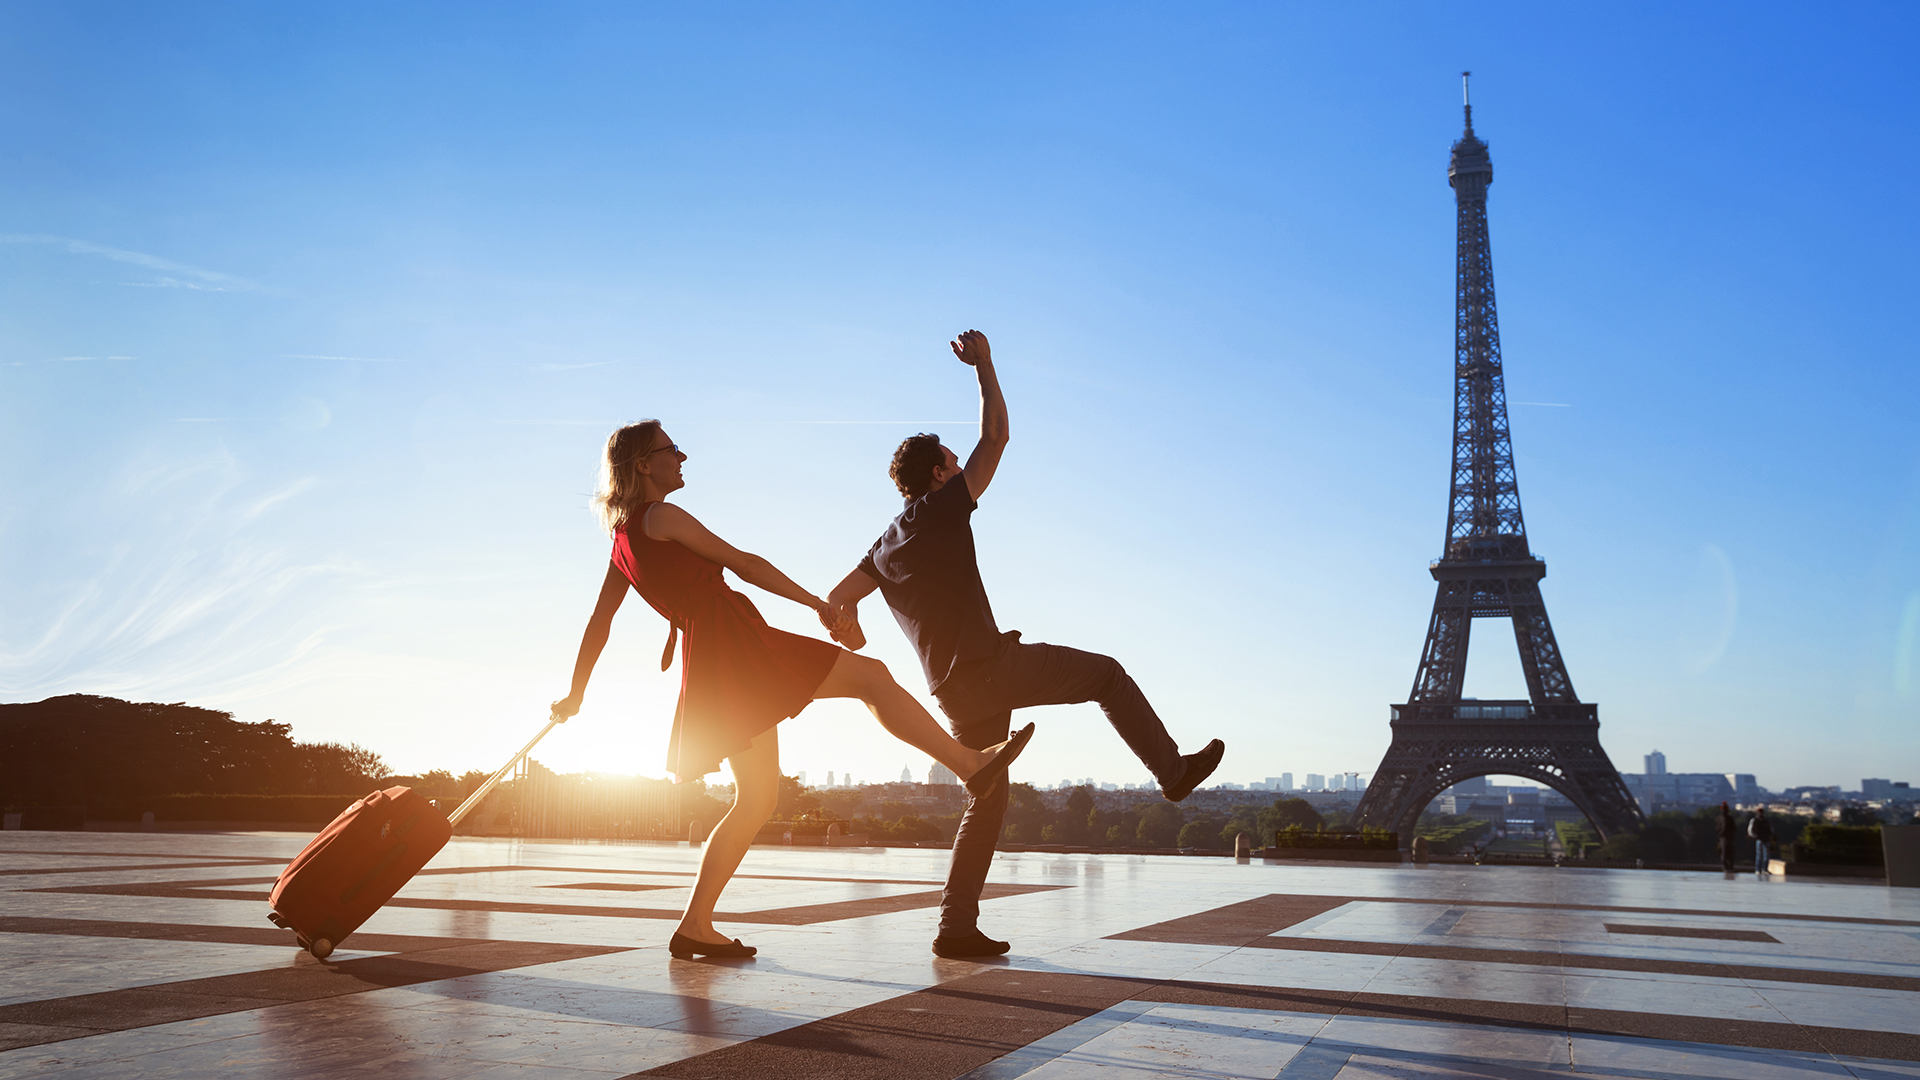 Couple in Paris dancing in front of the Eiffel Tower